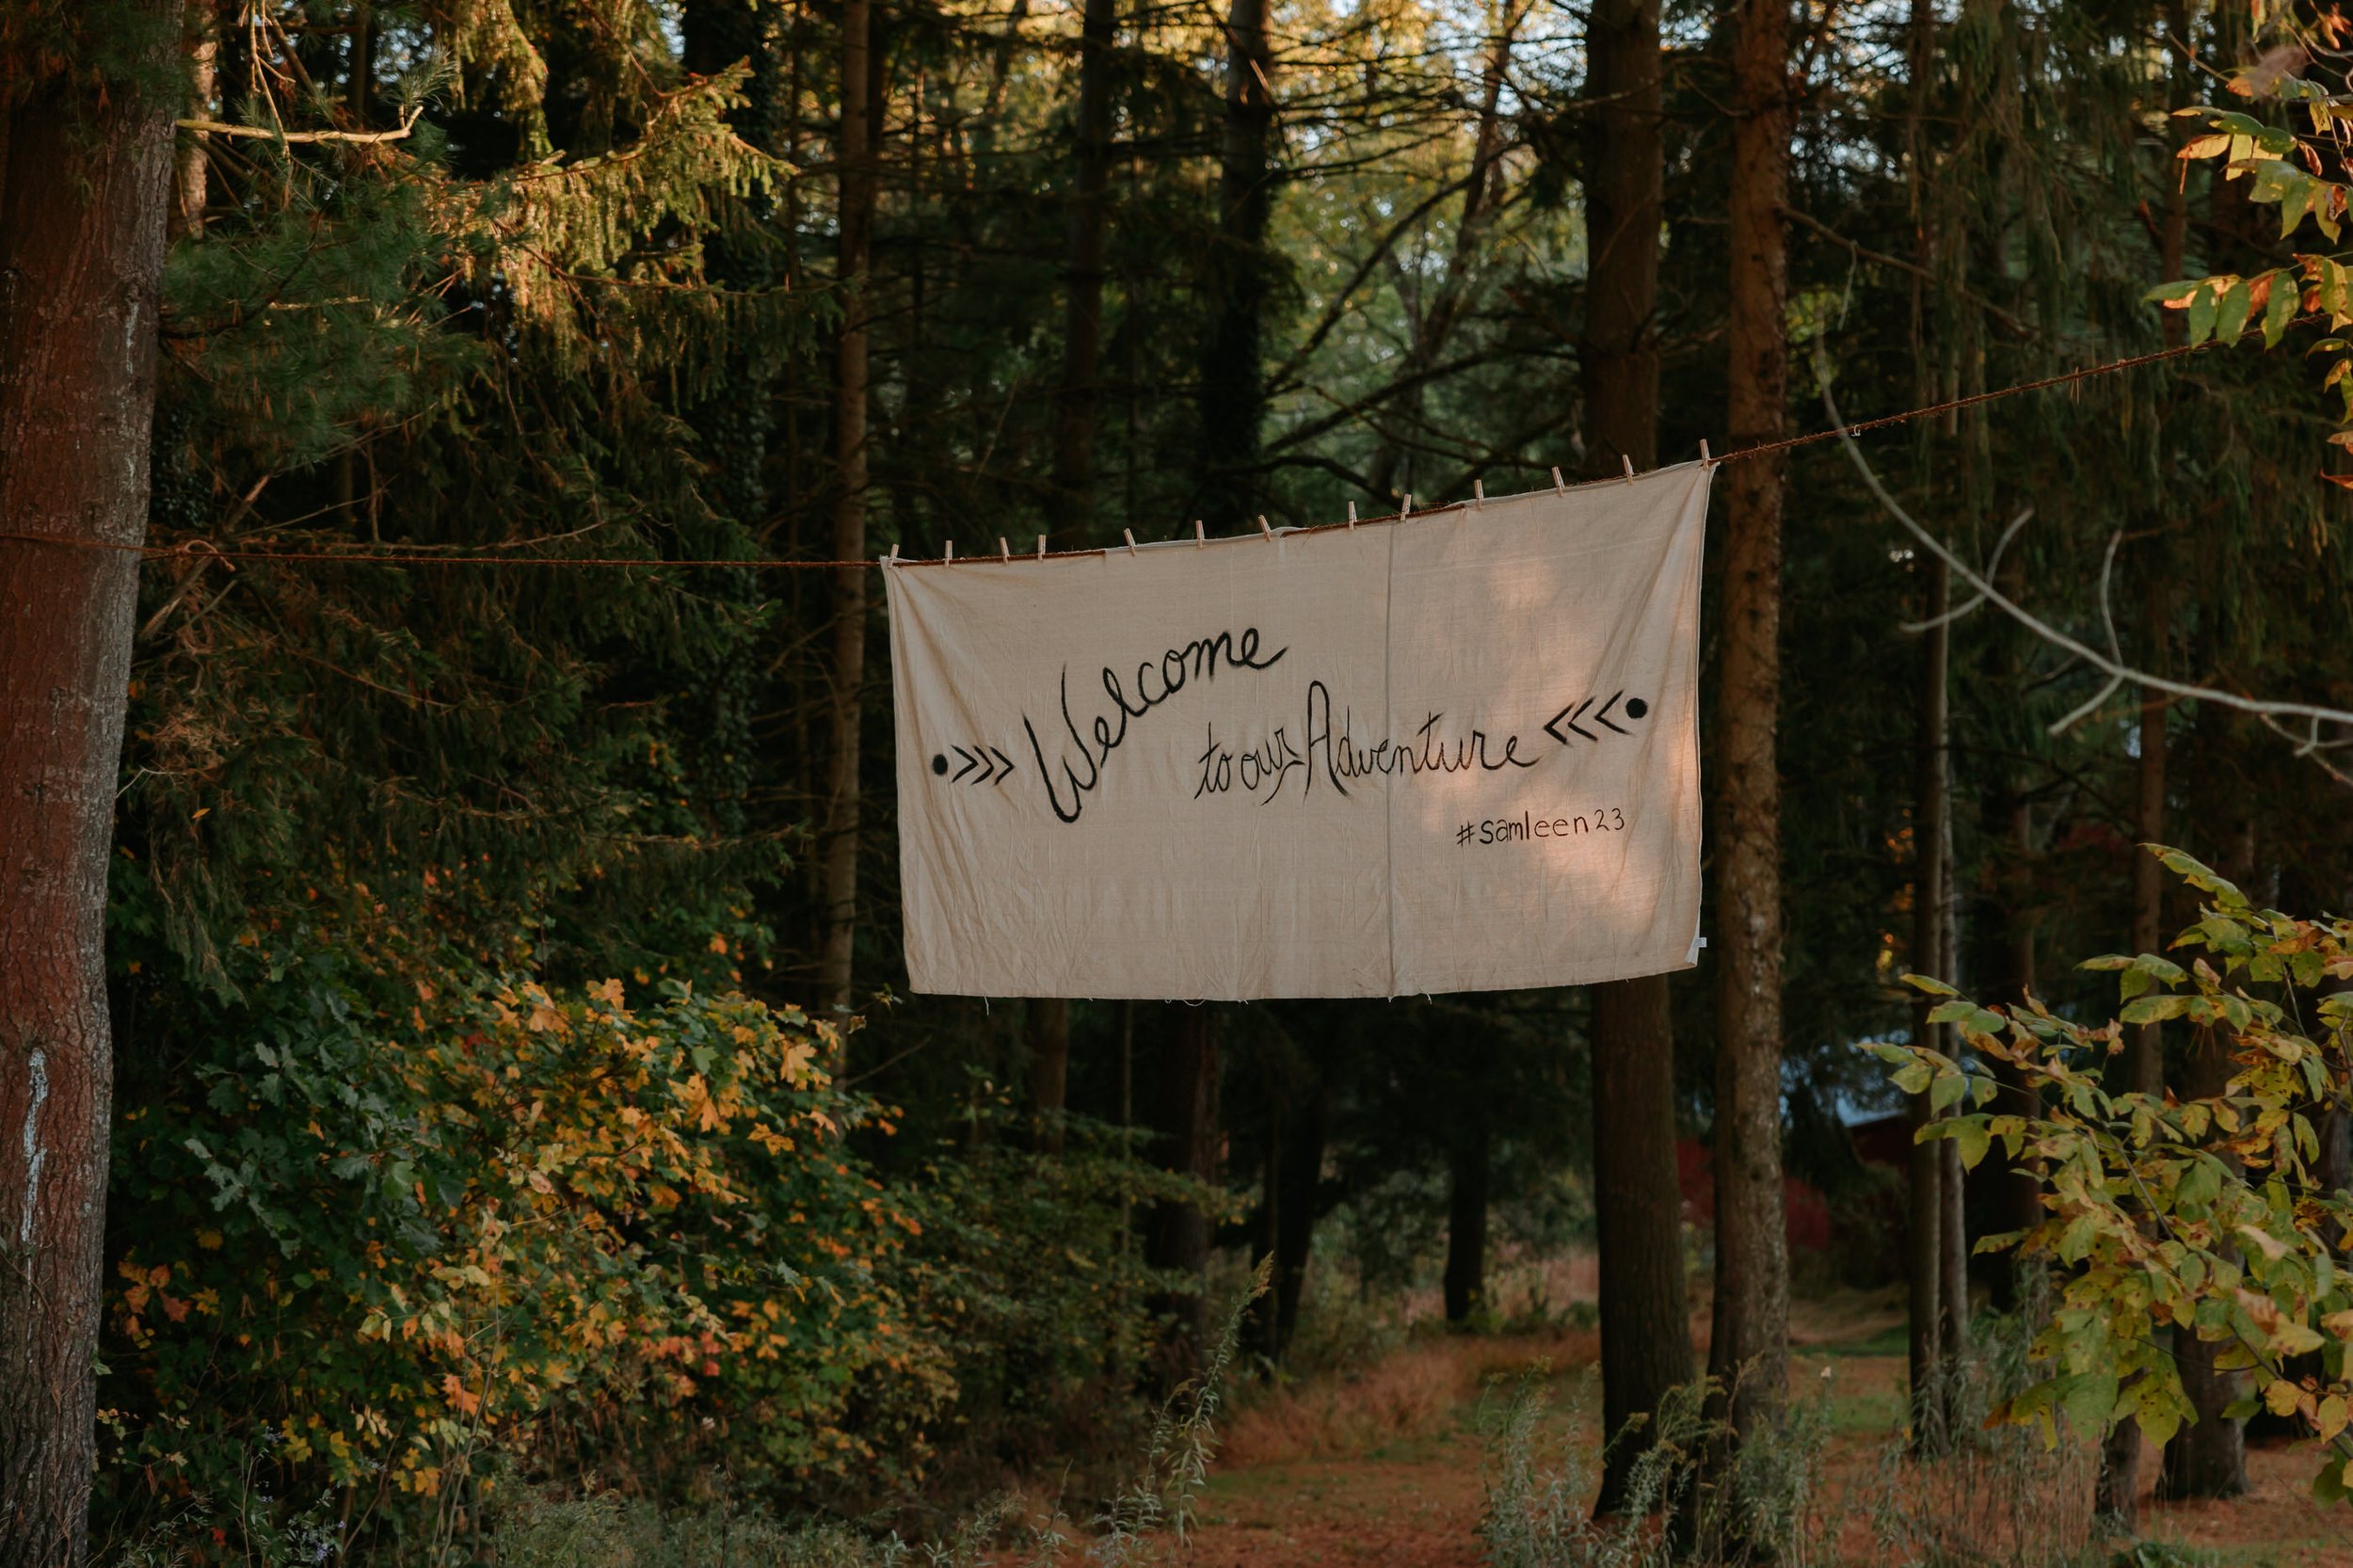 A brown wedding sign hangs in the trees.